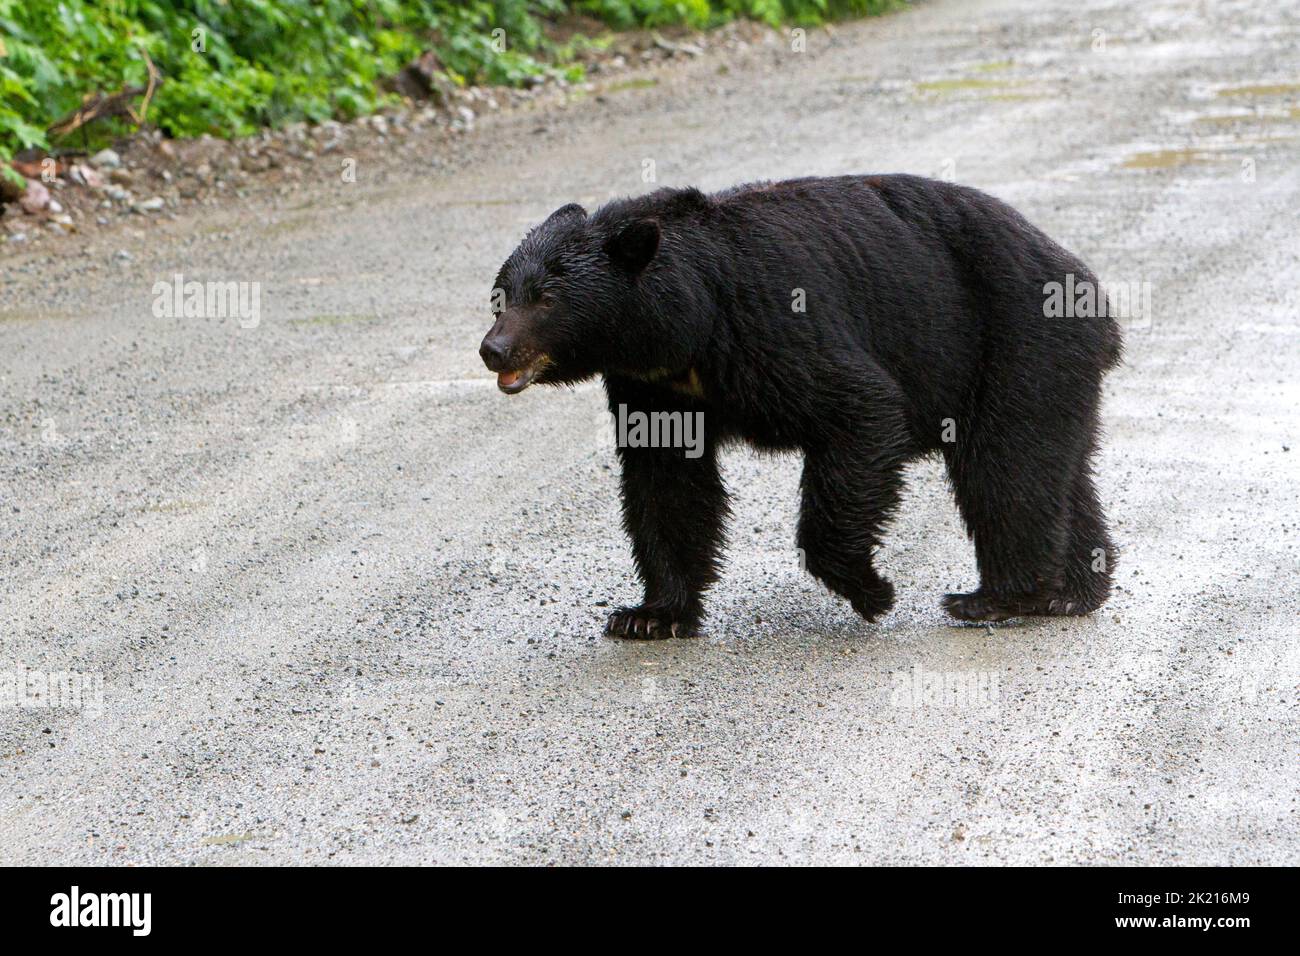 A Black Bear (Ursus americanus) walking across a gravel mountain road in the rain in the Tongass National Forest, near Hyder, Alaska, USA in July Stock Photo